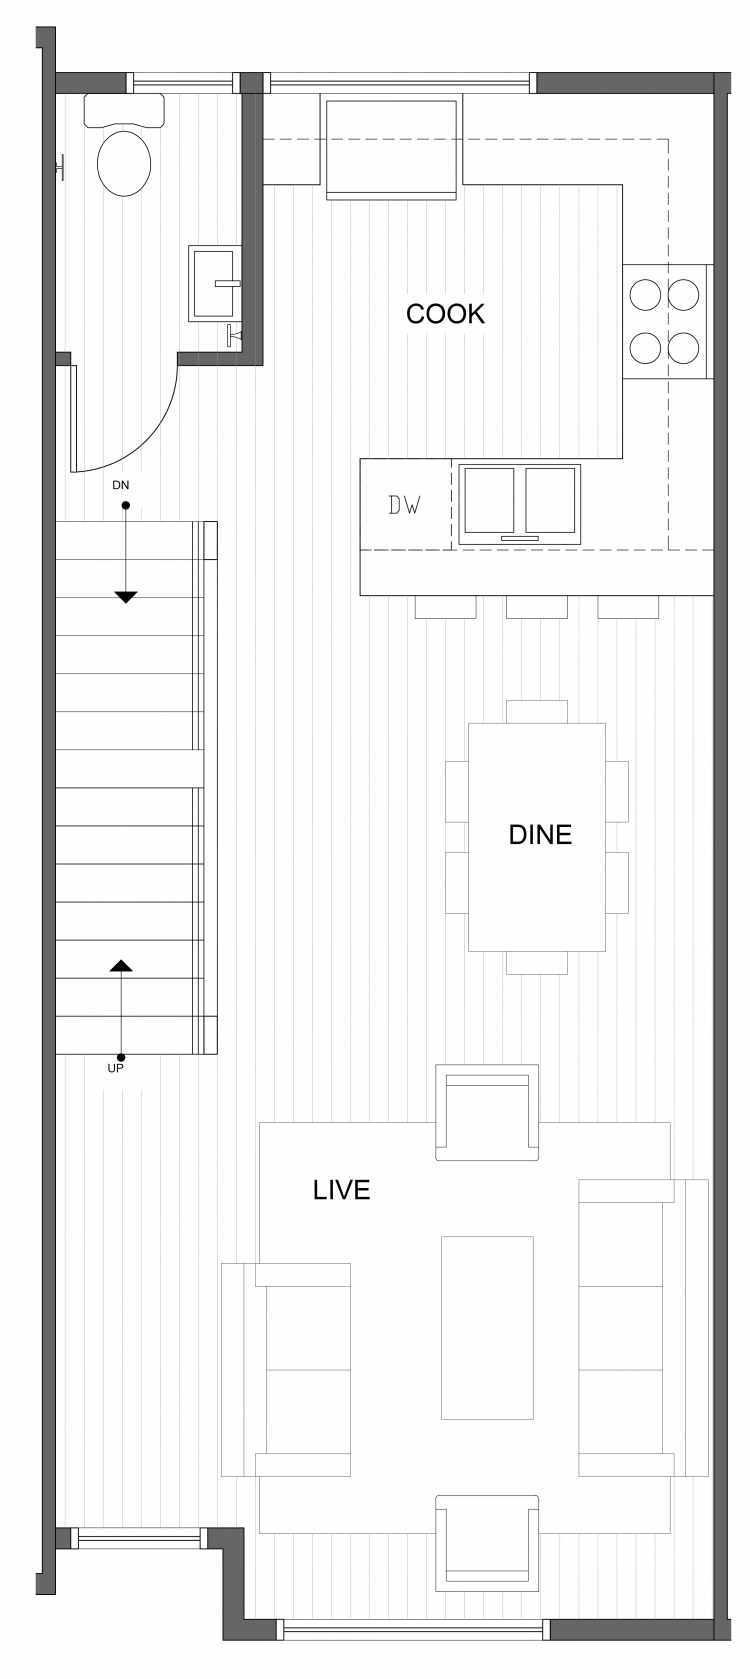 Second Floor Plan of 1030B NE 70th St, One of the Sopris on 70th Townhomes in Roosevelt